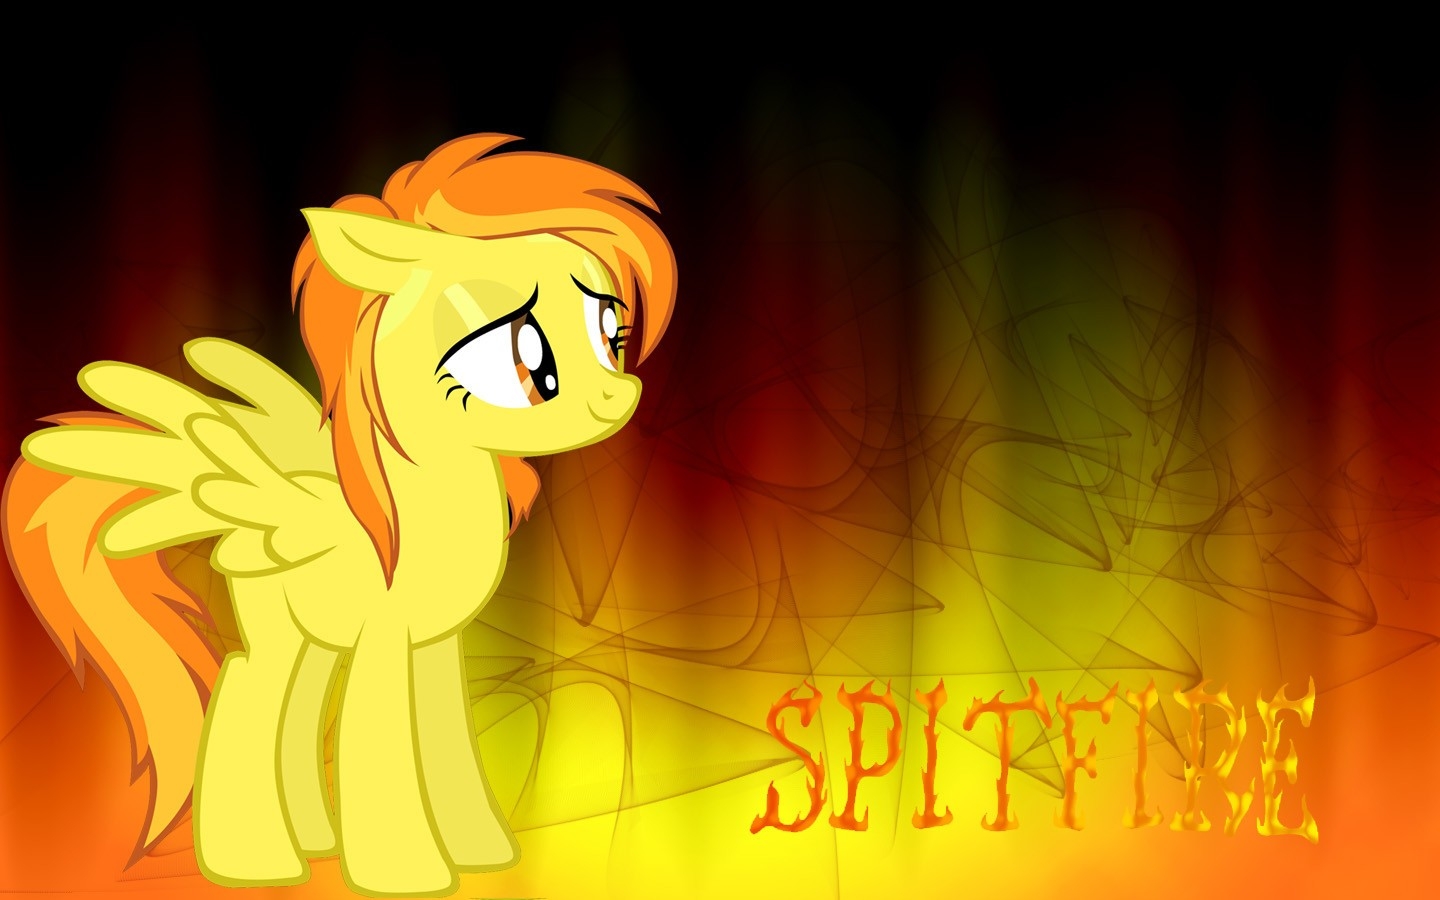 My Little Pony Spitfire Mlp Character Wallpaper Art - Spitfire Mlp , HD Wallpaper & Backgrounds